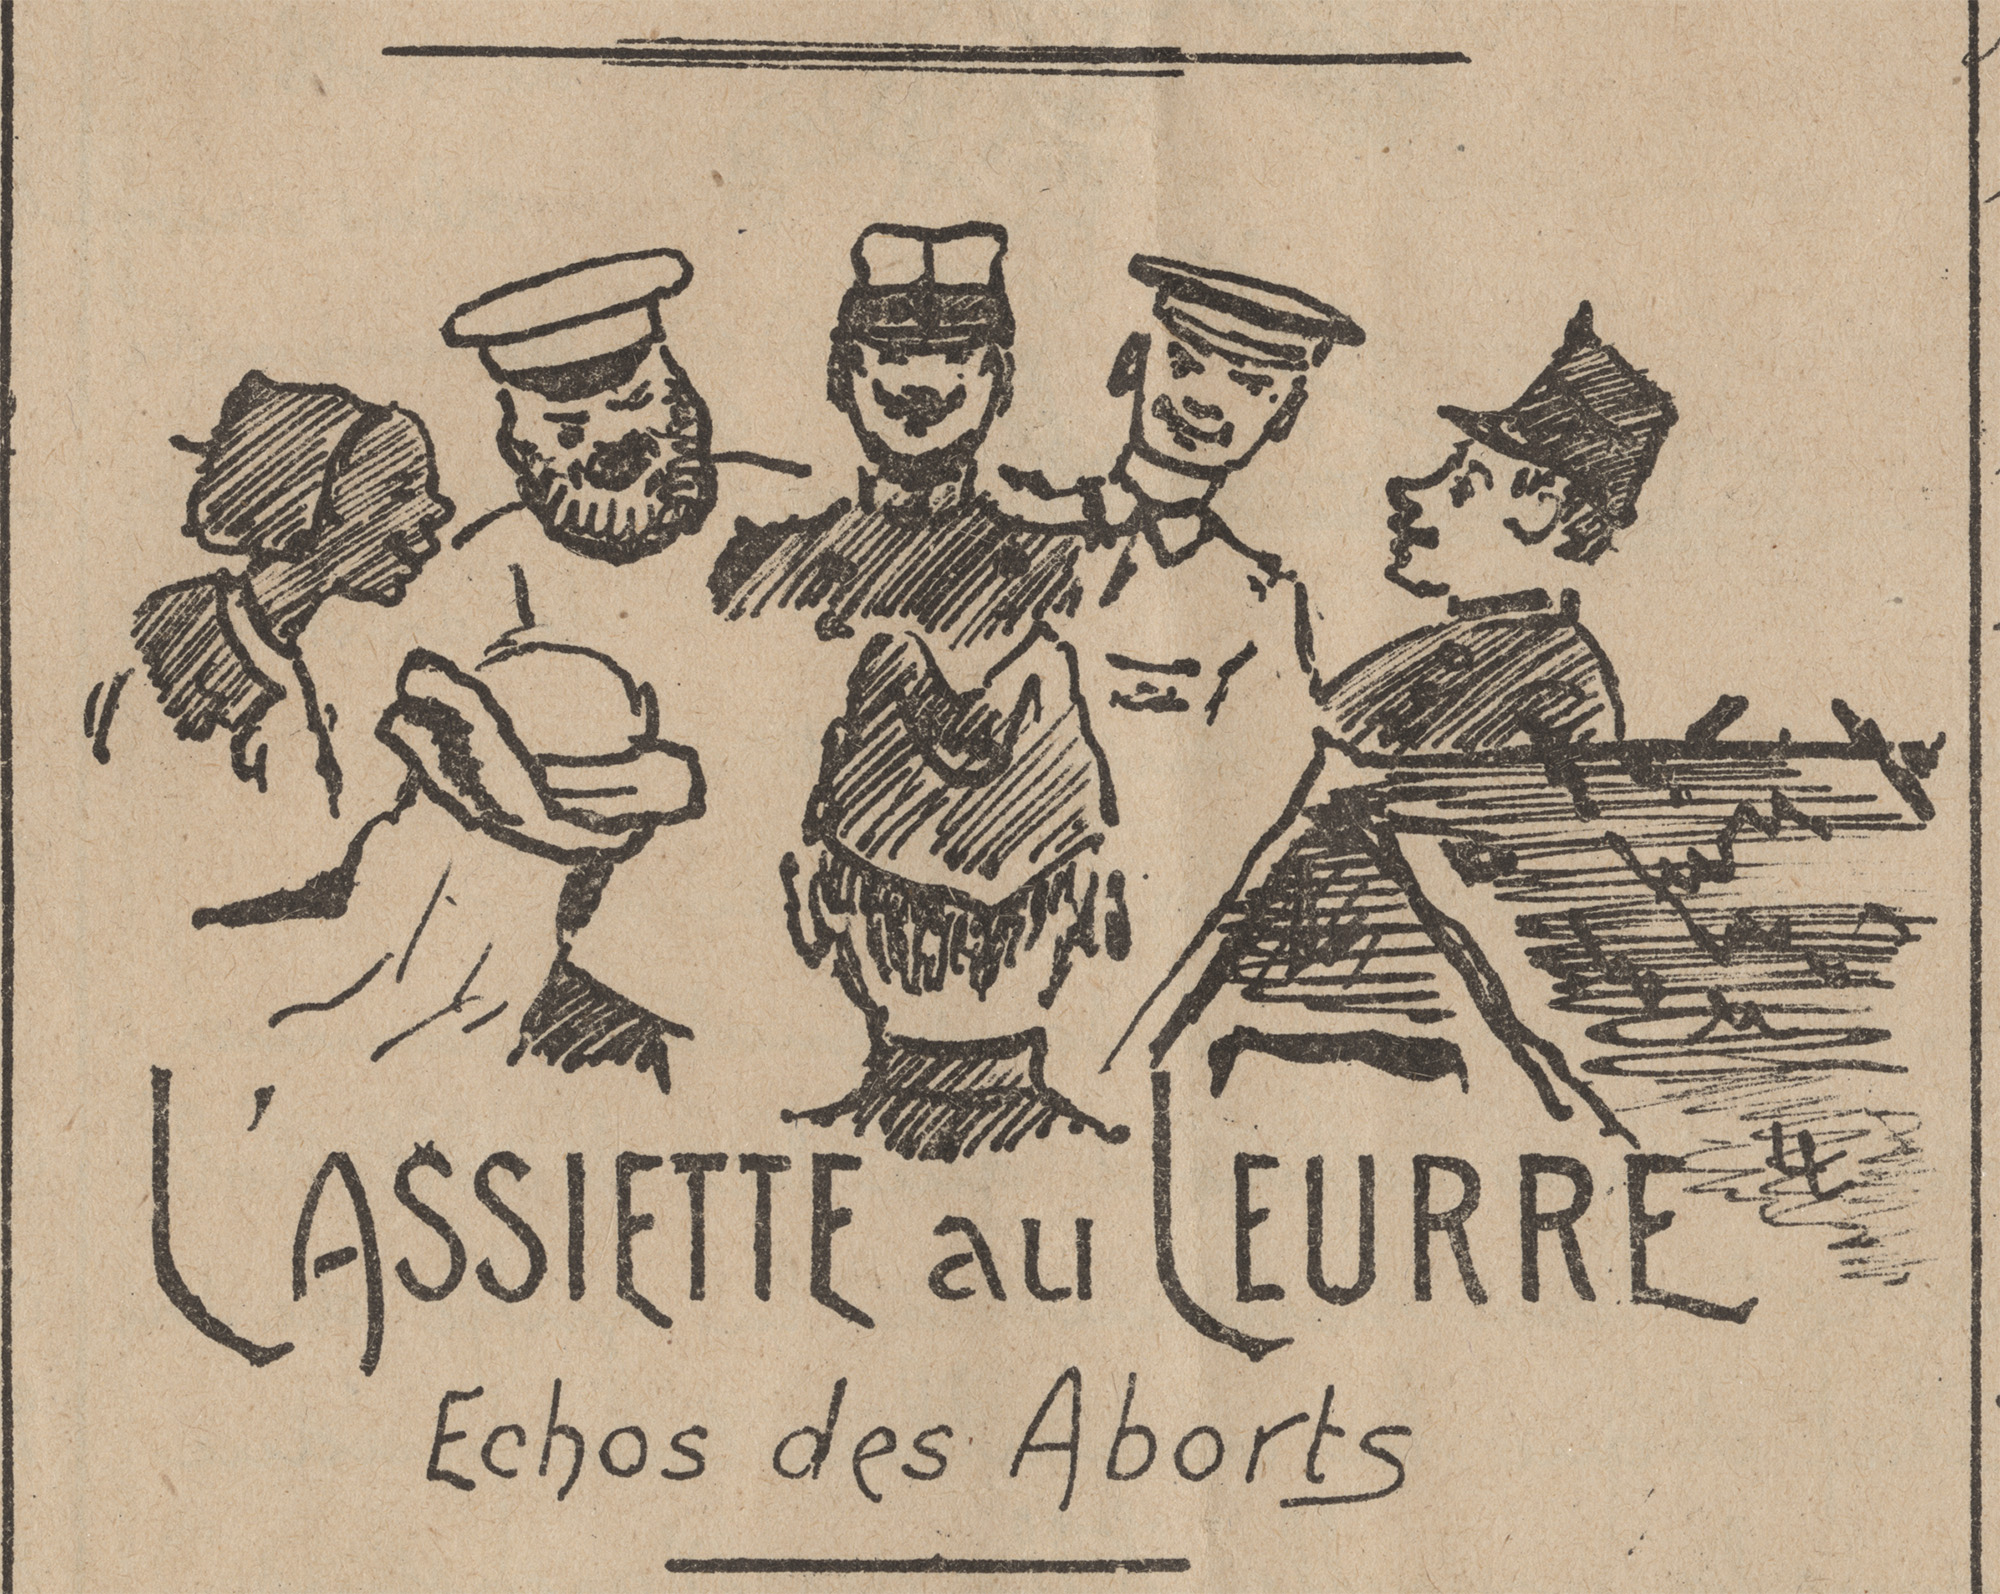 Scan of a cartoon depicting men of different nationalities gathered in a circle. Text: L'Assiette au Leurre / Echos des Aborts